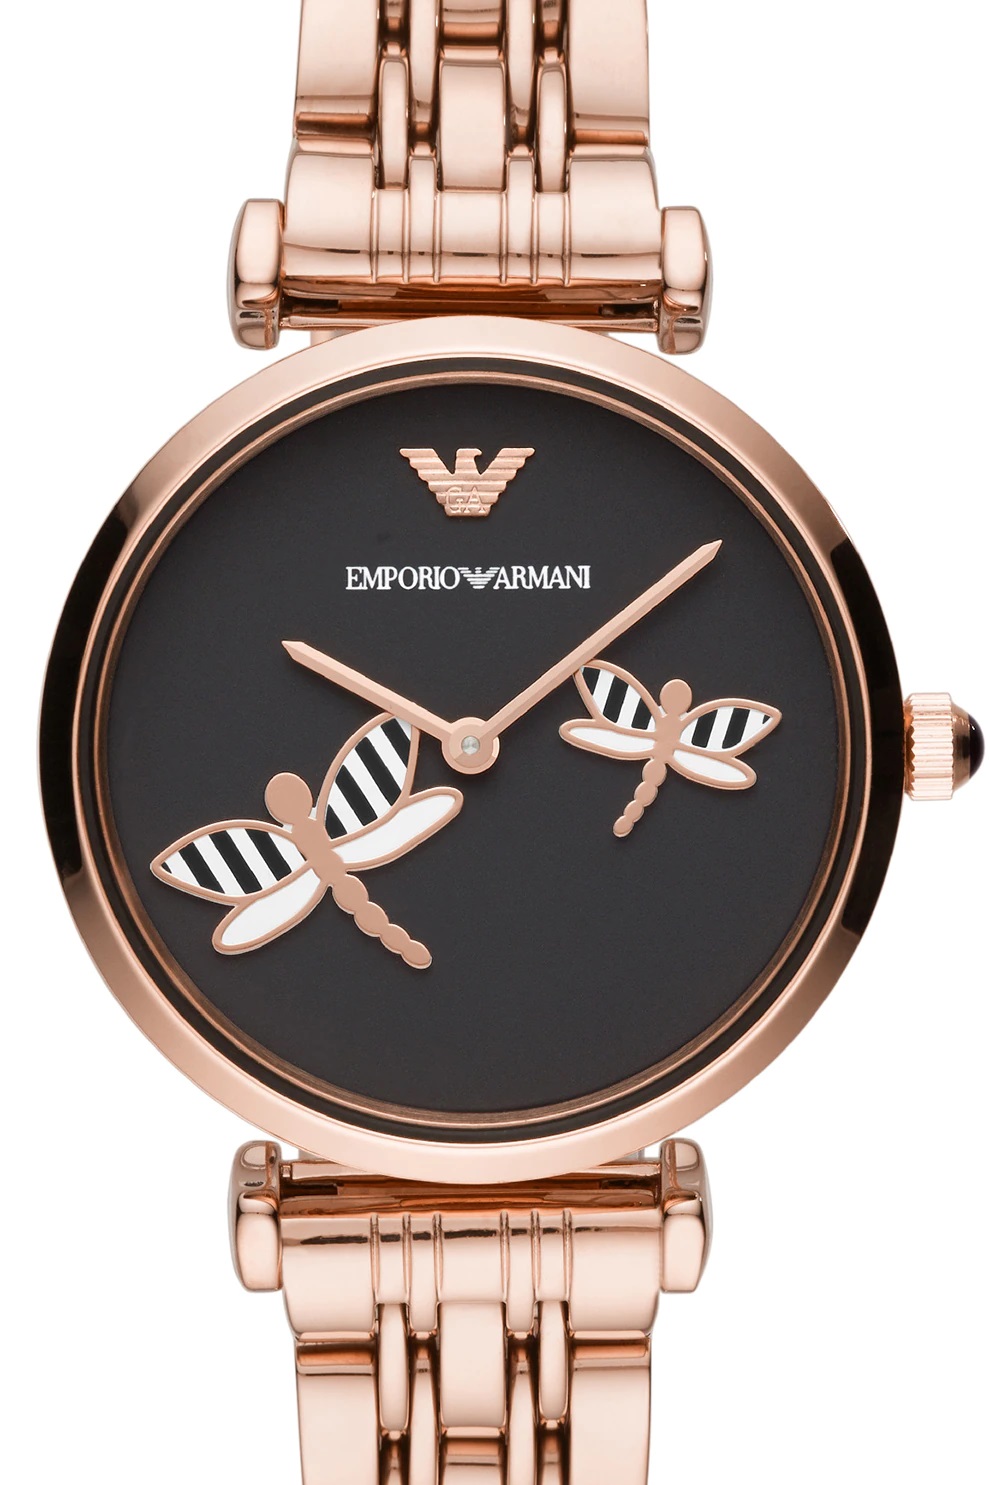 ĐỒNG HỒ NỮ EMPORIO ARMANI DRAGONFLY GIANNI T-BAR AR11206 BLACK DIAL WATCH FOR WOMEN 8